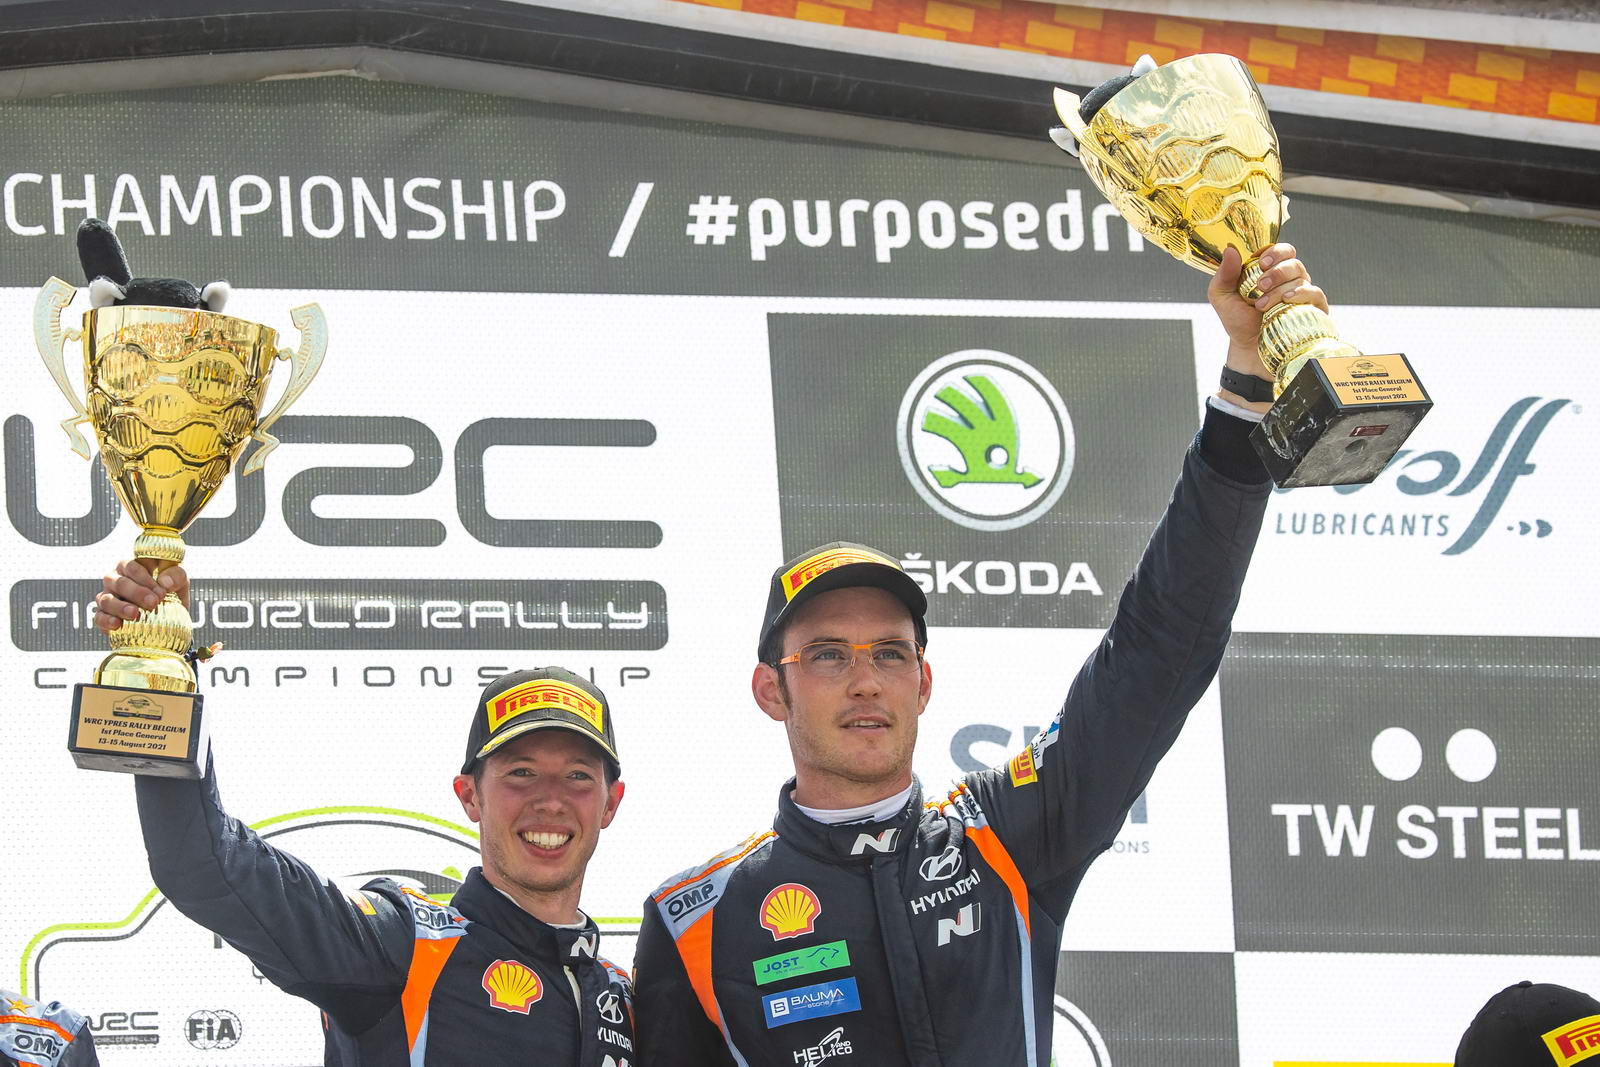 Thierry Neuville and Martijn Wydaeghe